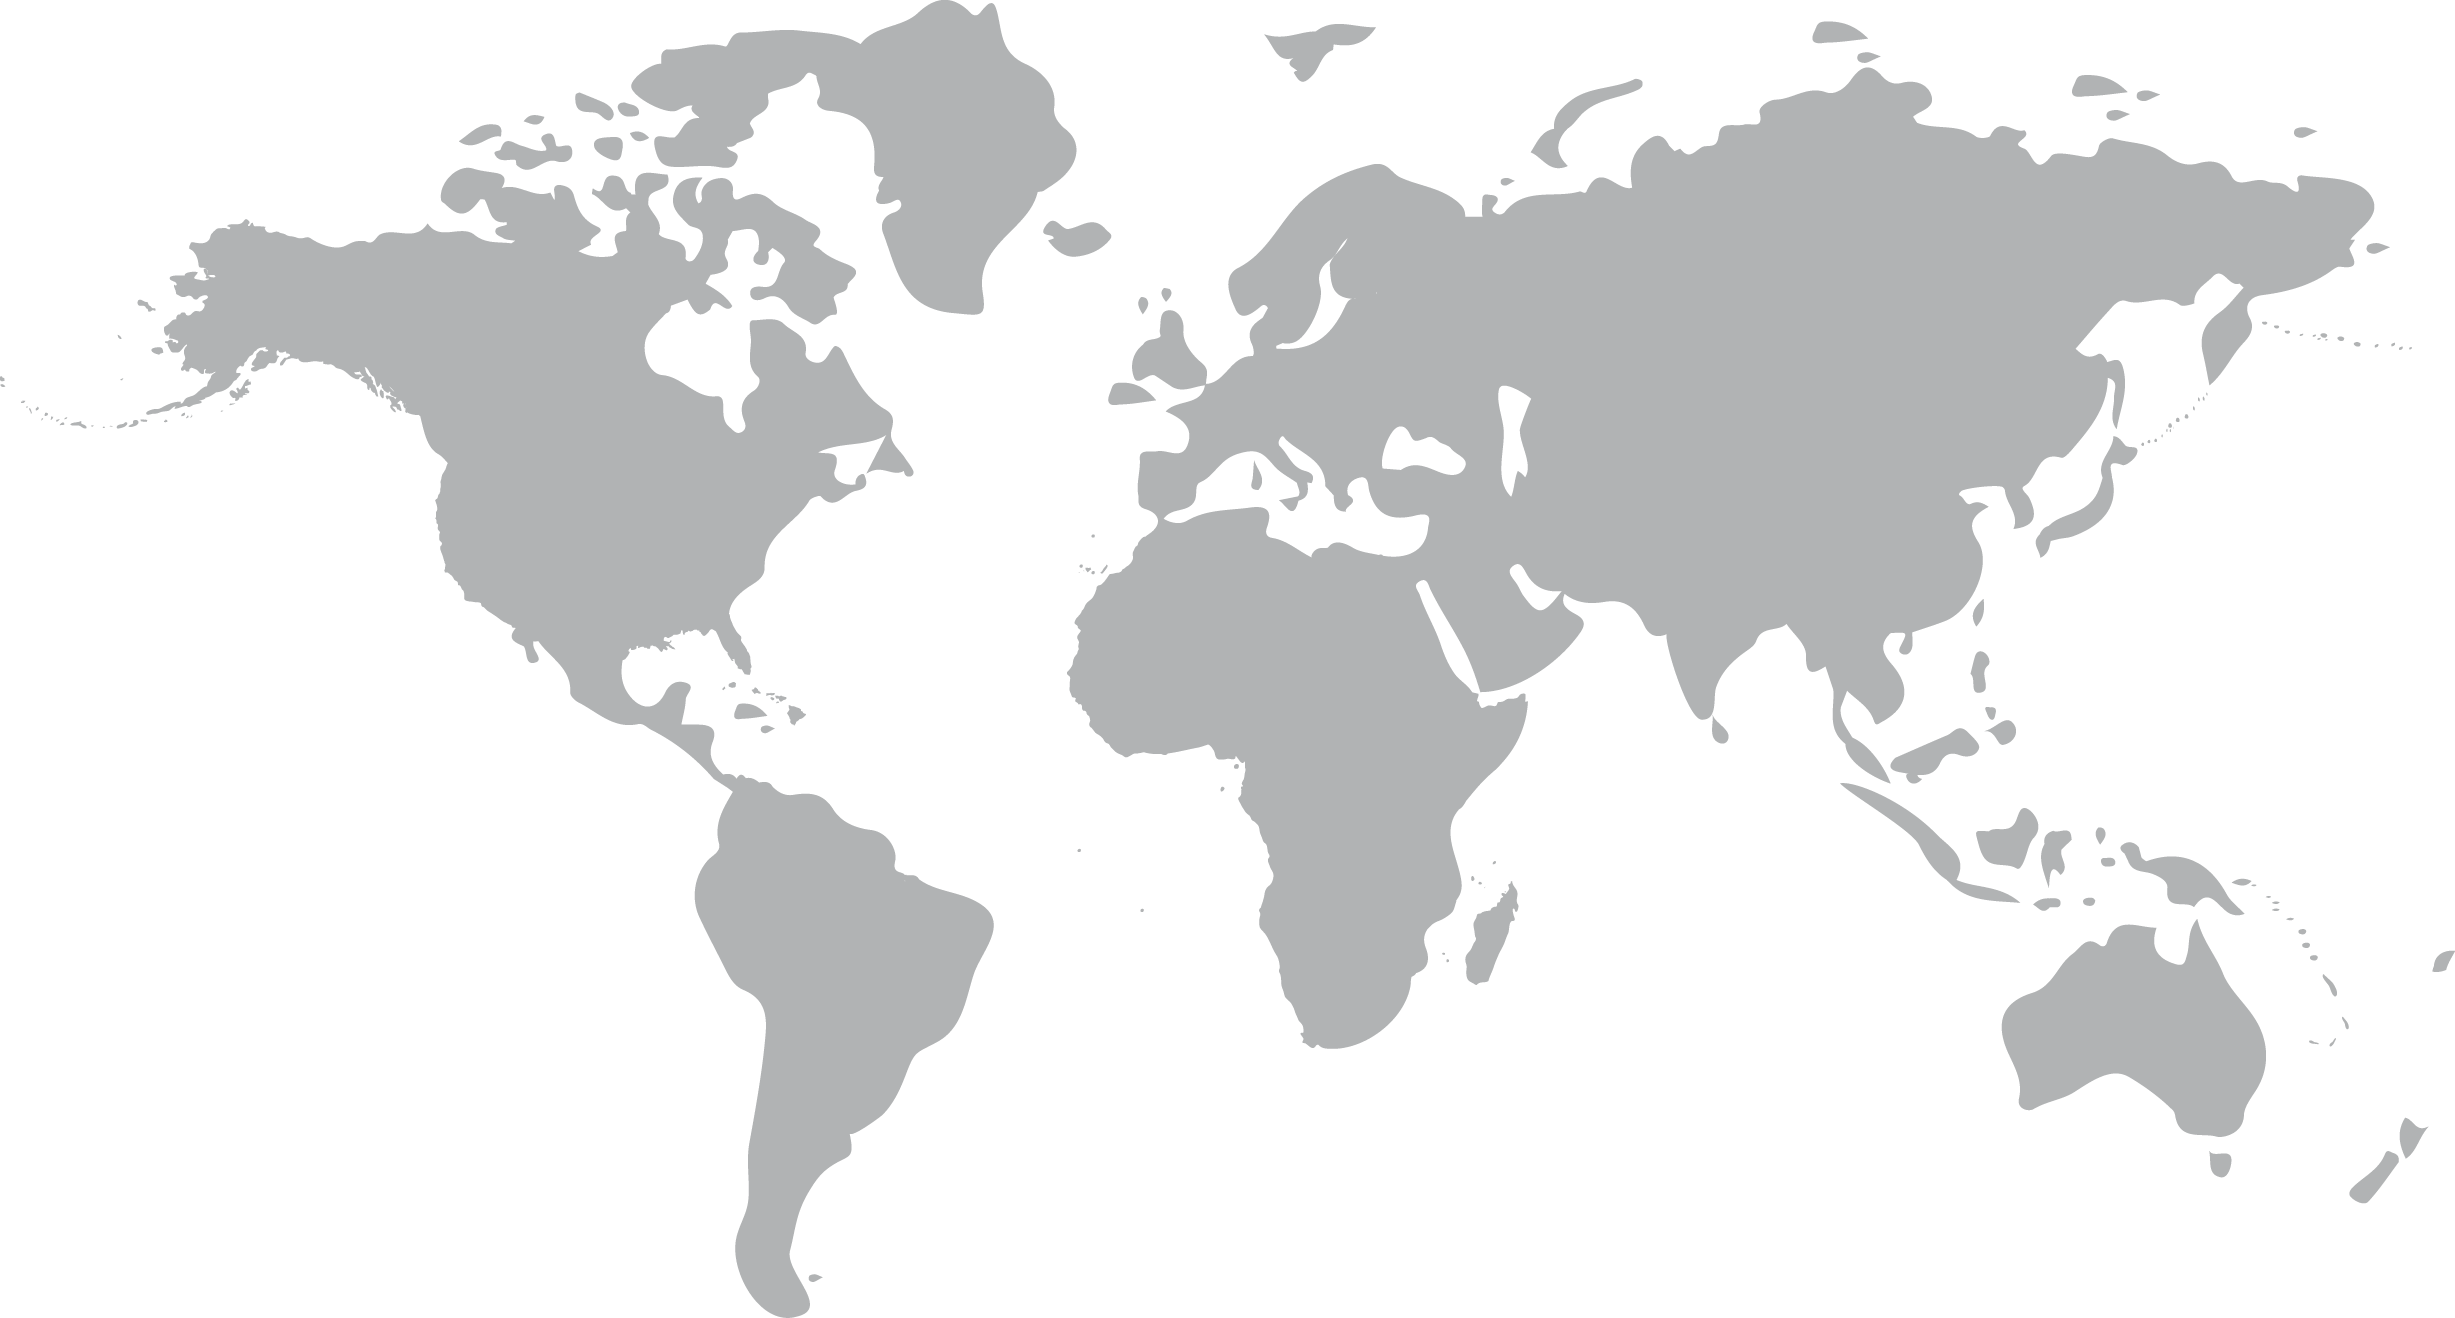 map of the world black and white png Download Map Globe Black World White Hq Png Image Freepngimg map of the world black and white png